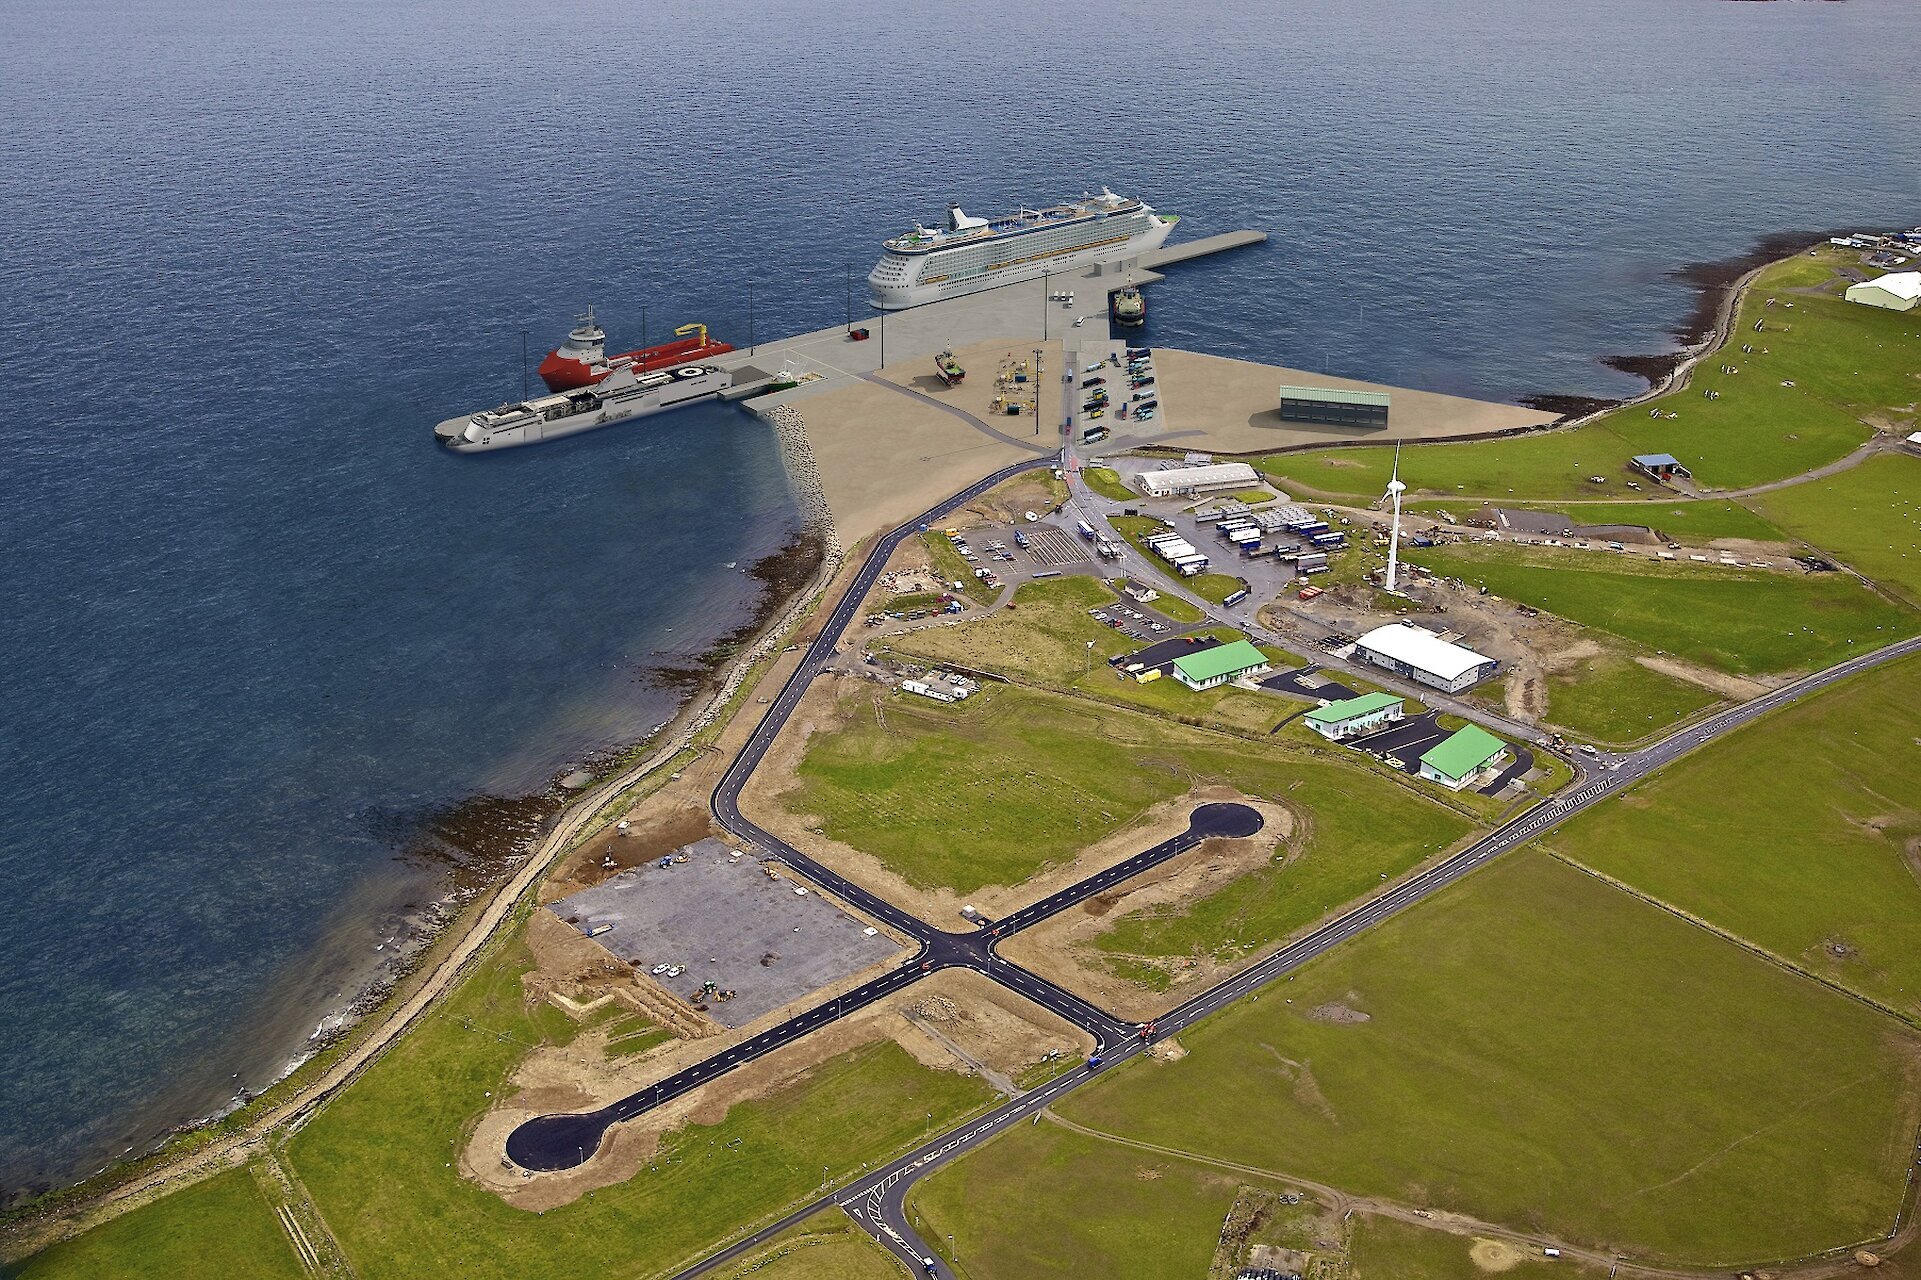 Proposed extension to Hatston Pier (image courtesy of OIC)